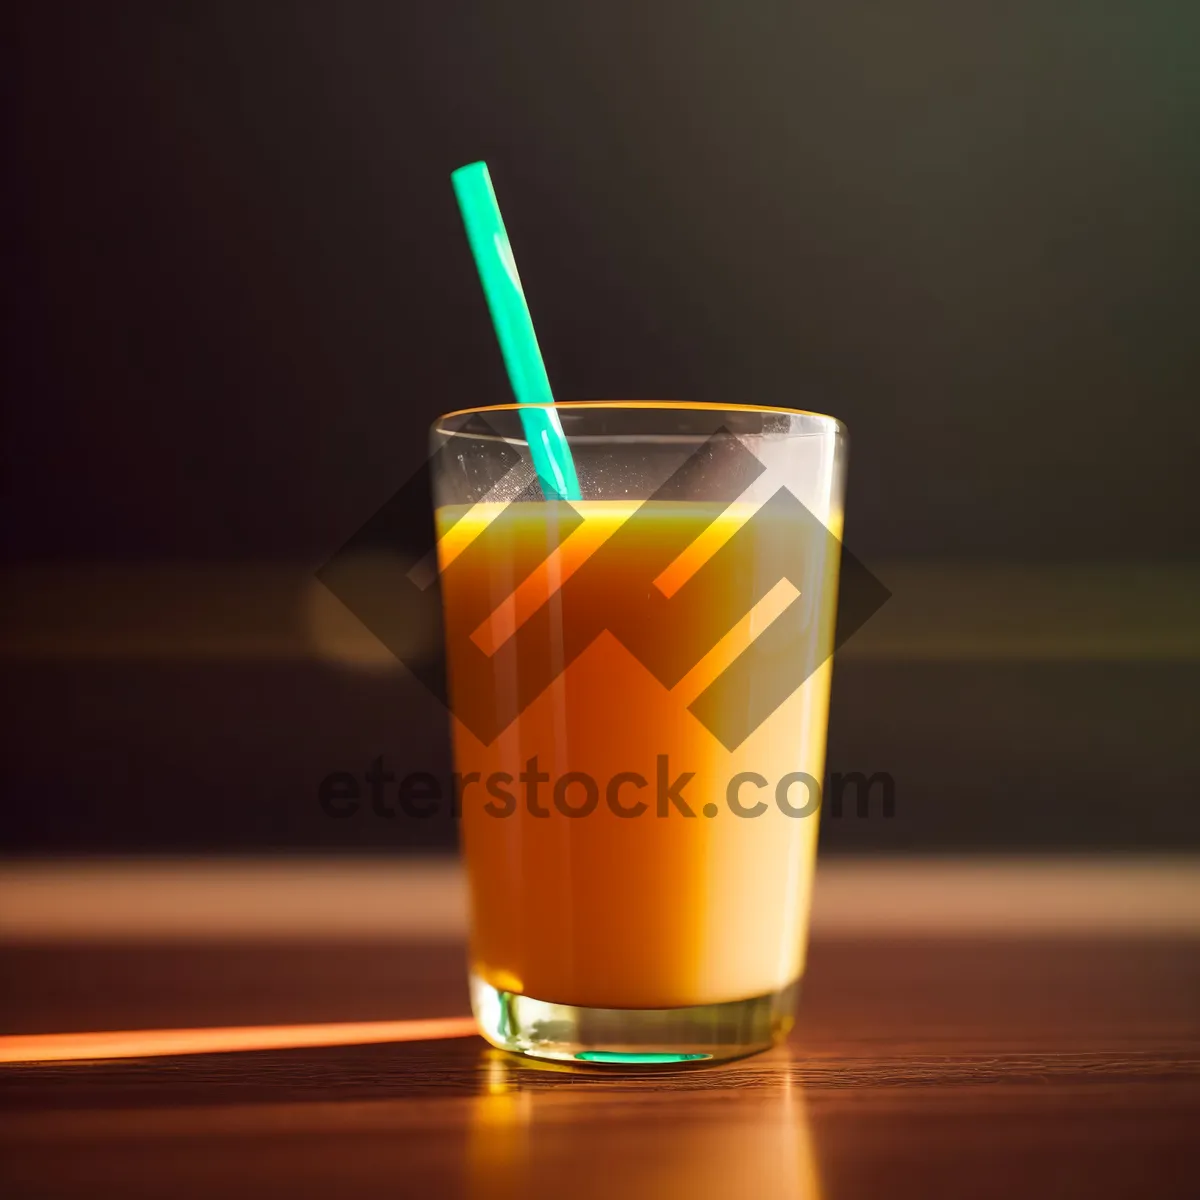 Picture of Zesty Orange Juice in Chilled Glass with Straw